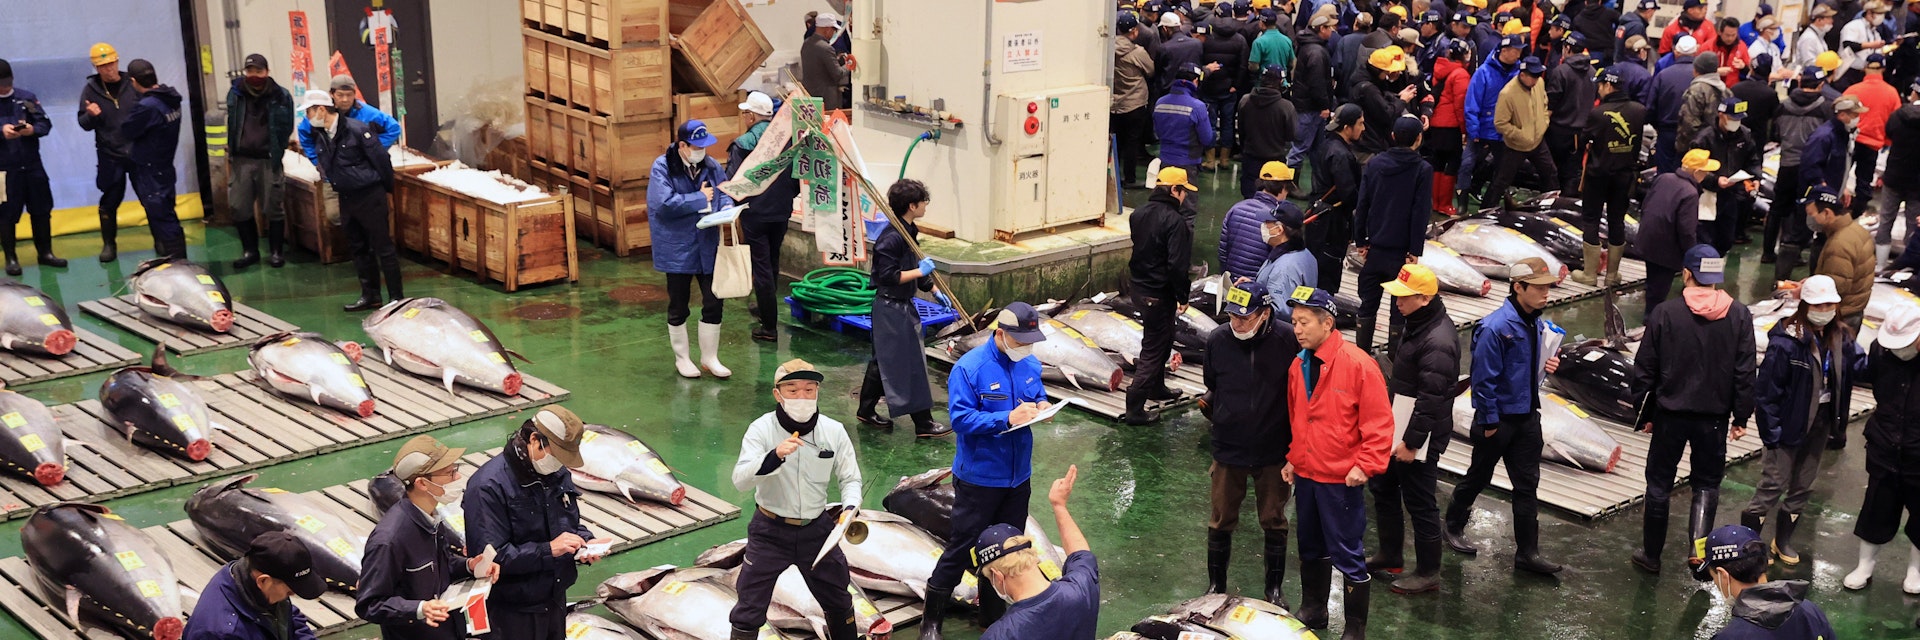 TOKYO, JAPAN - JANUARY 05: A general view of the first tuna auction of the New Year at Toyosu Wholesale Fish Market on January 5, 2024 in Tokyo, Japan. (Photo by The Asahi Shimbun via Getty Images)
1908408787
